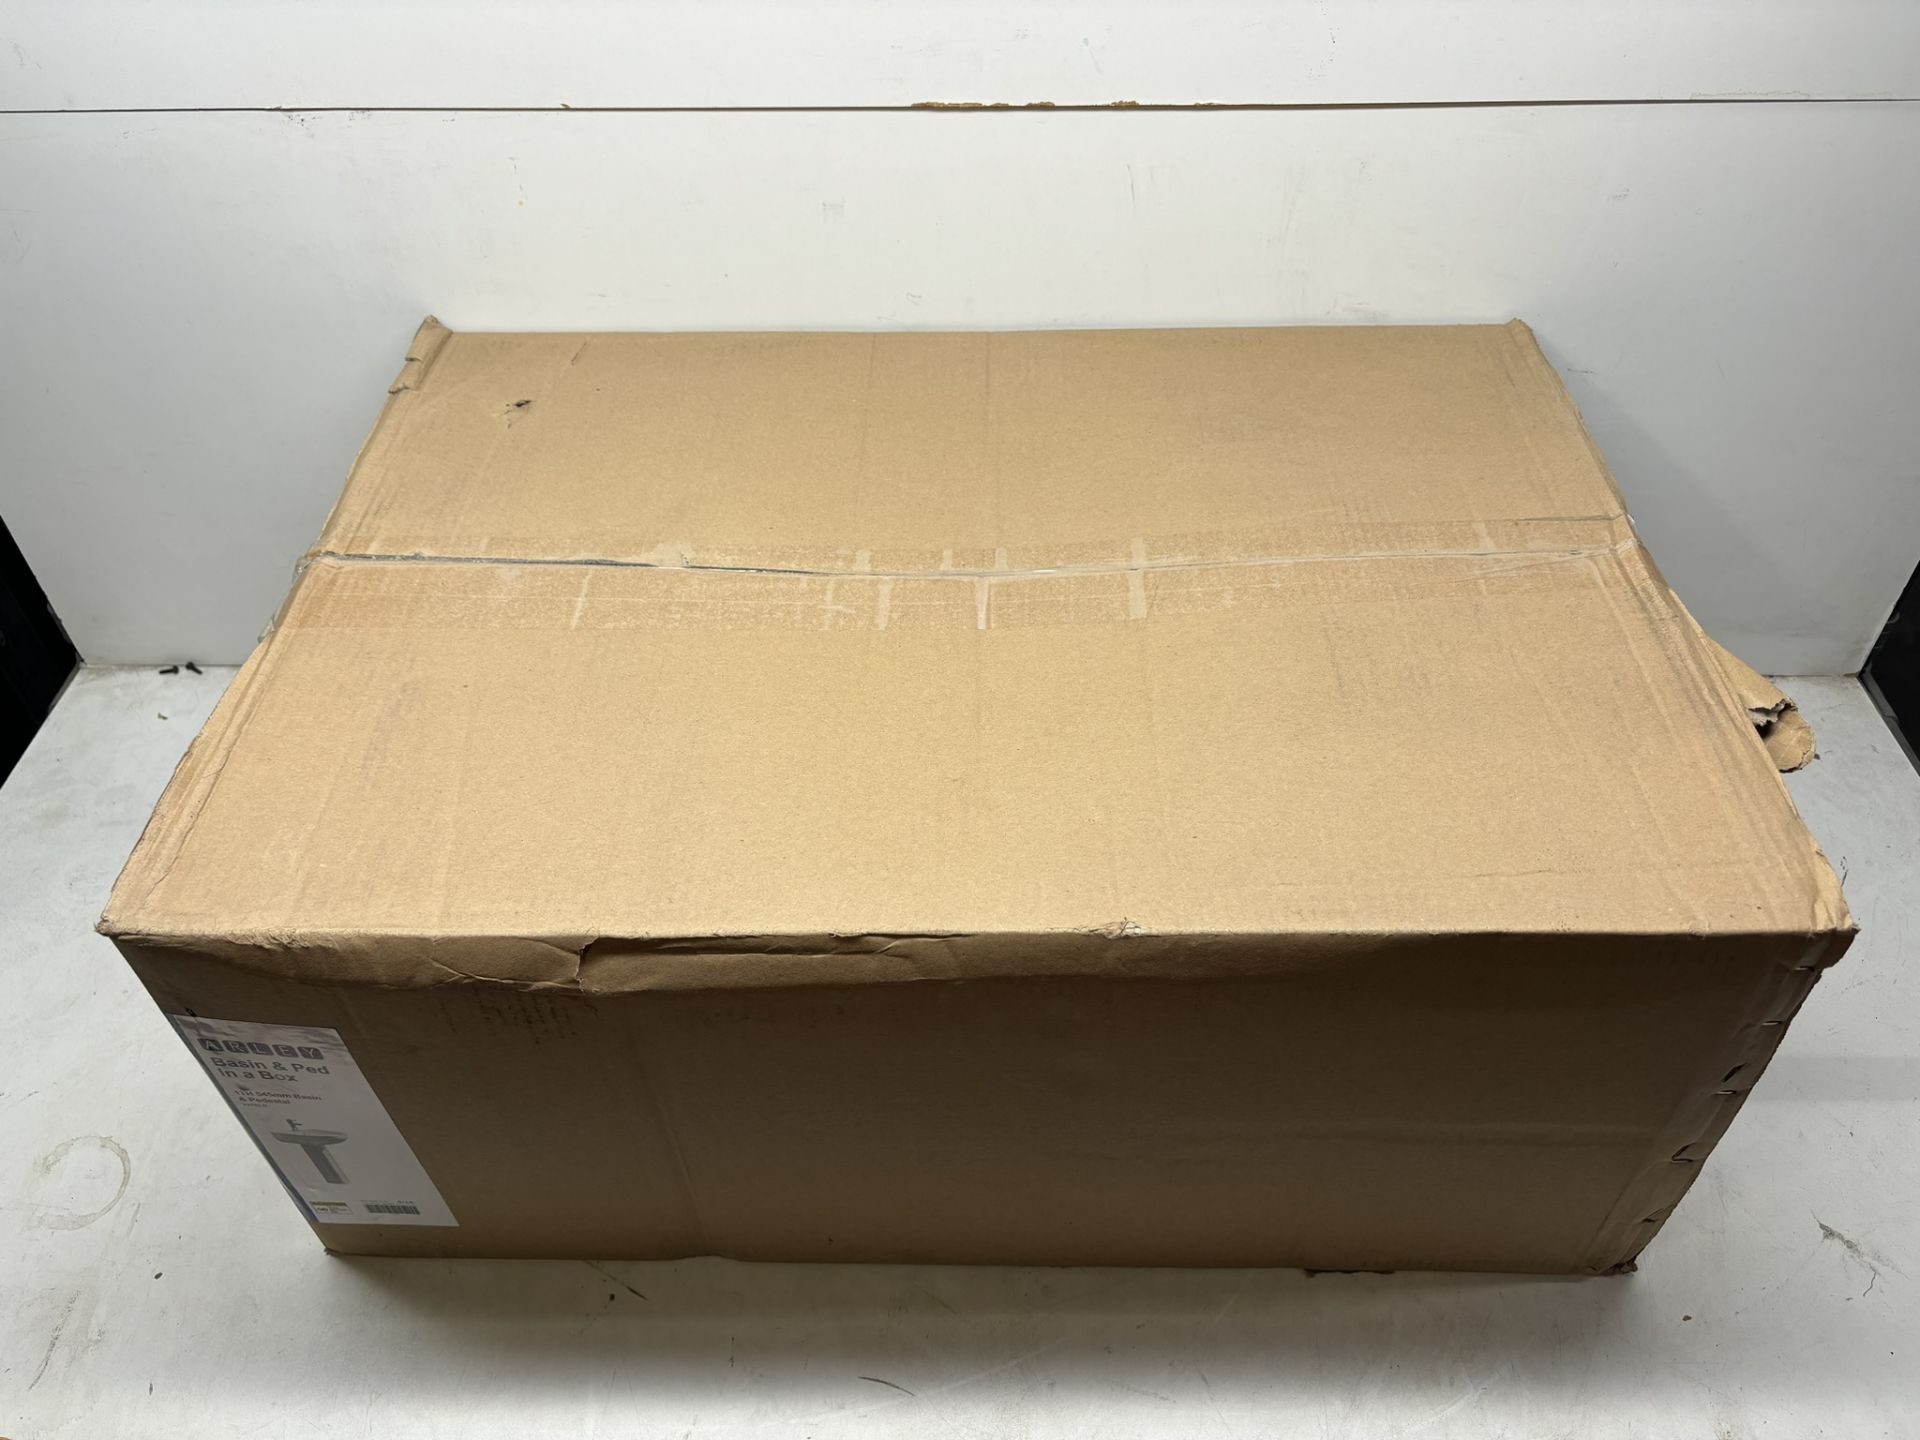 Arley 23702-D 1 Tap Hole 545mm Basin & Pedestal In A Box - Image 5 of 9